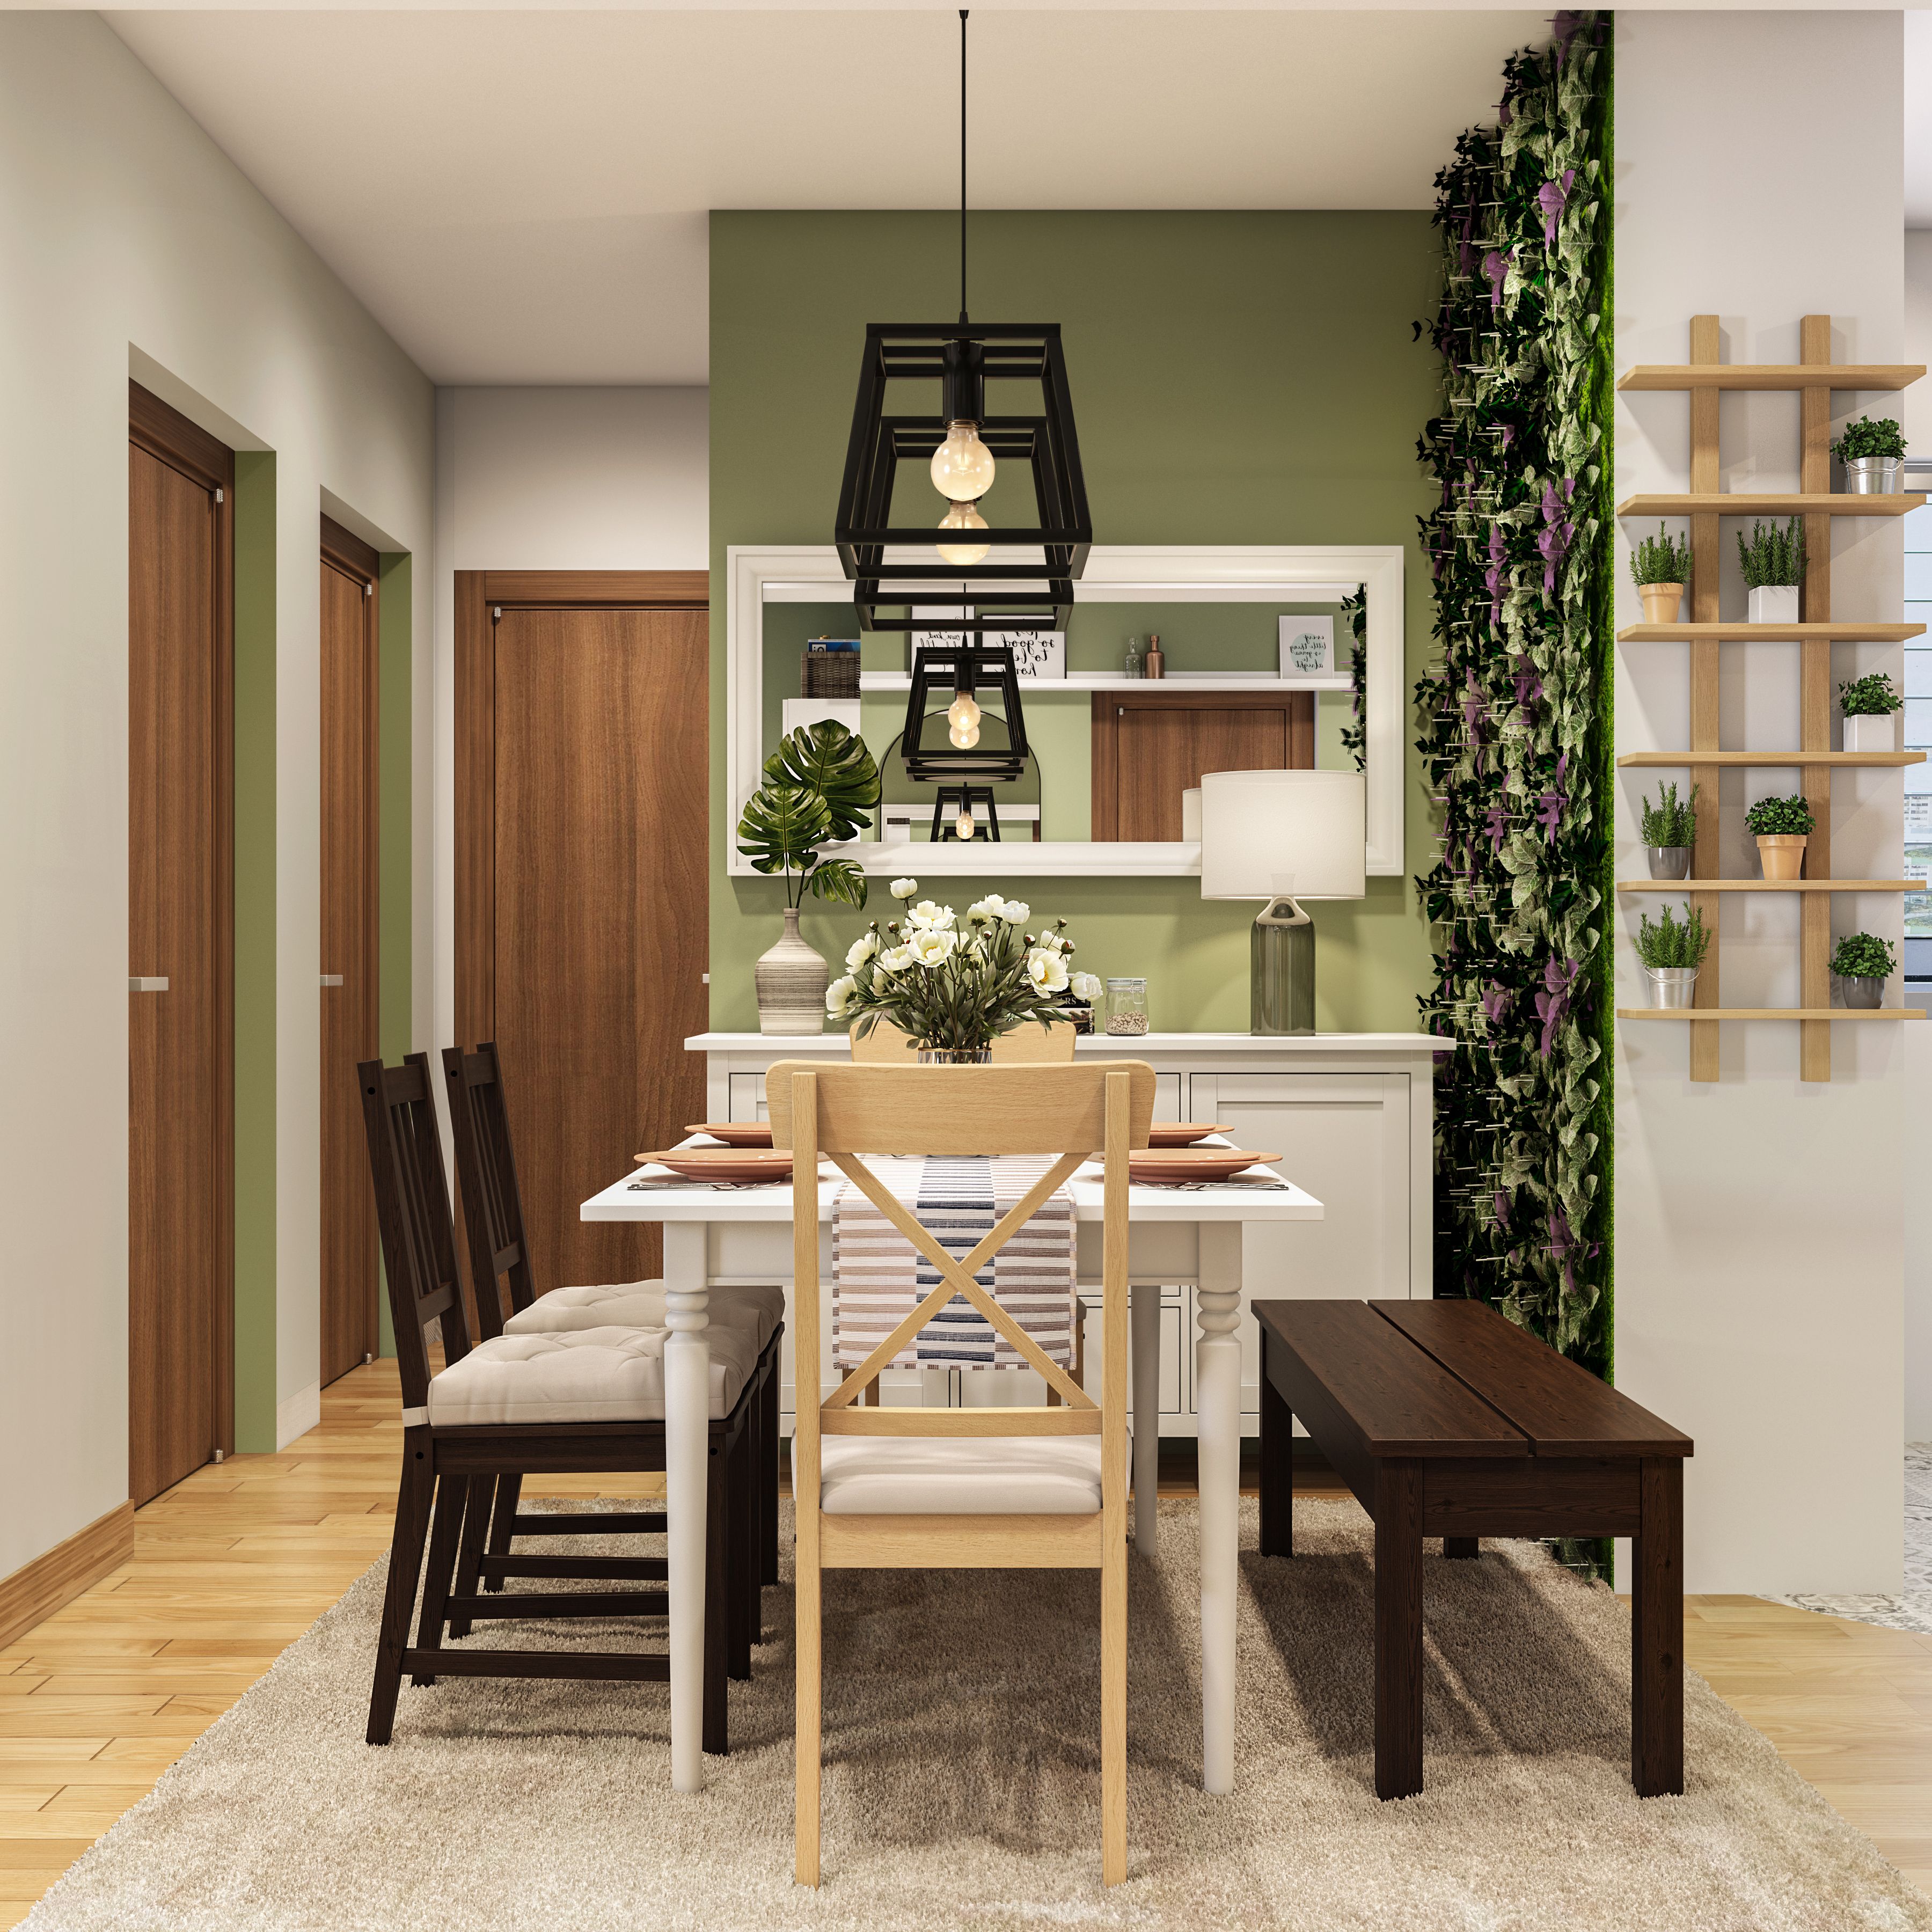 Modern Styled Spacious Low Maintenance Dining Room Design   Livspace